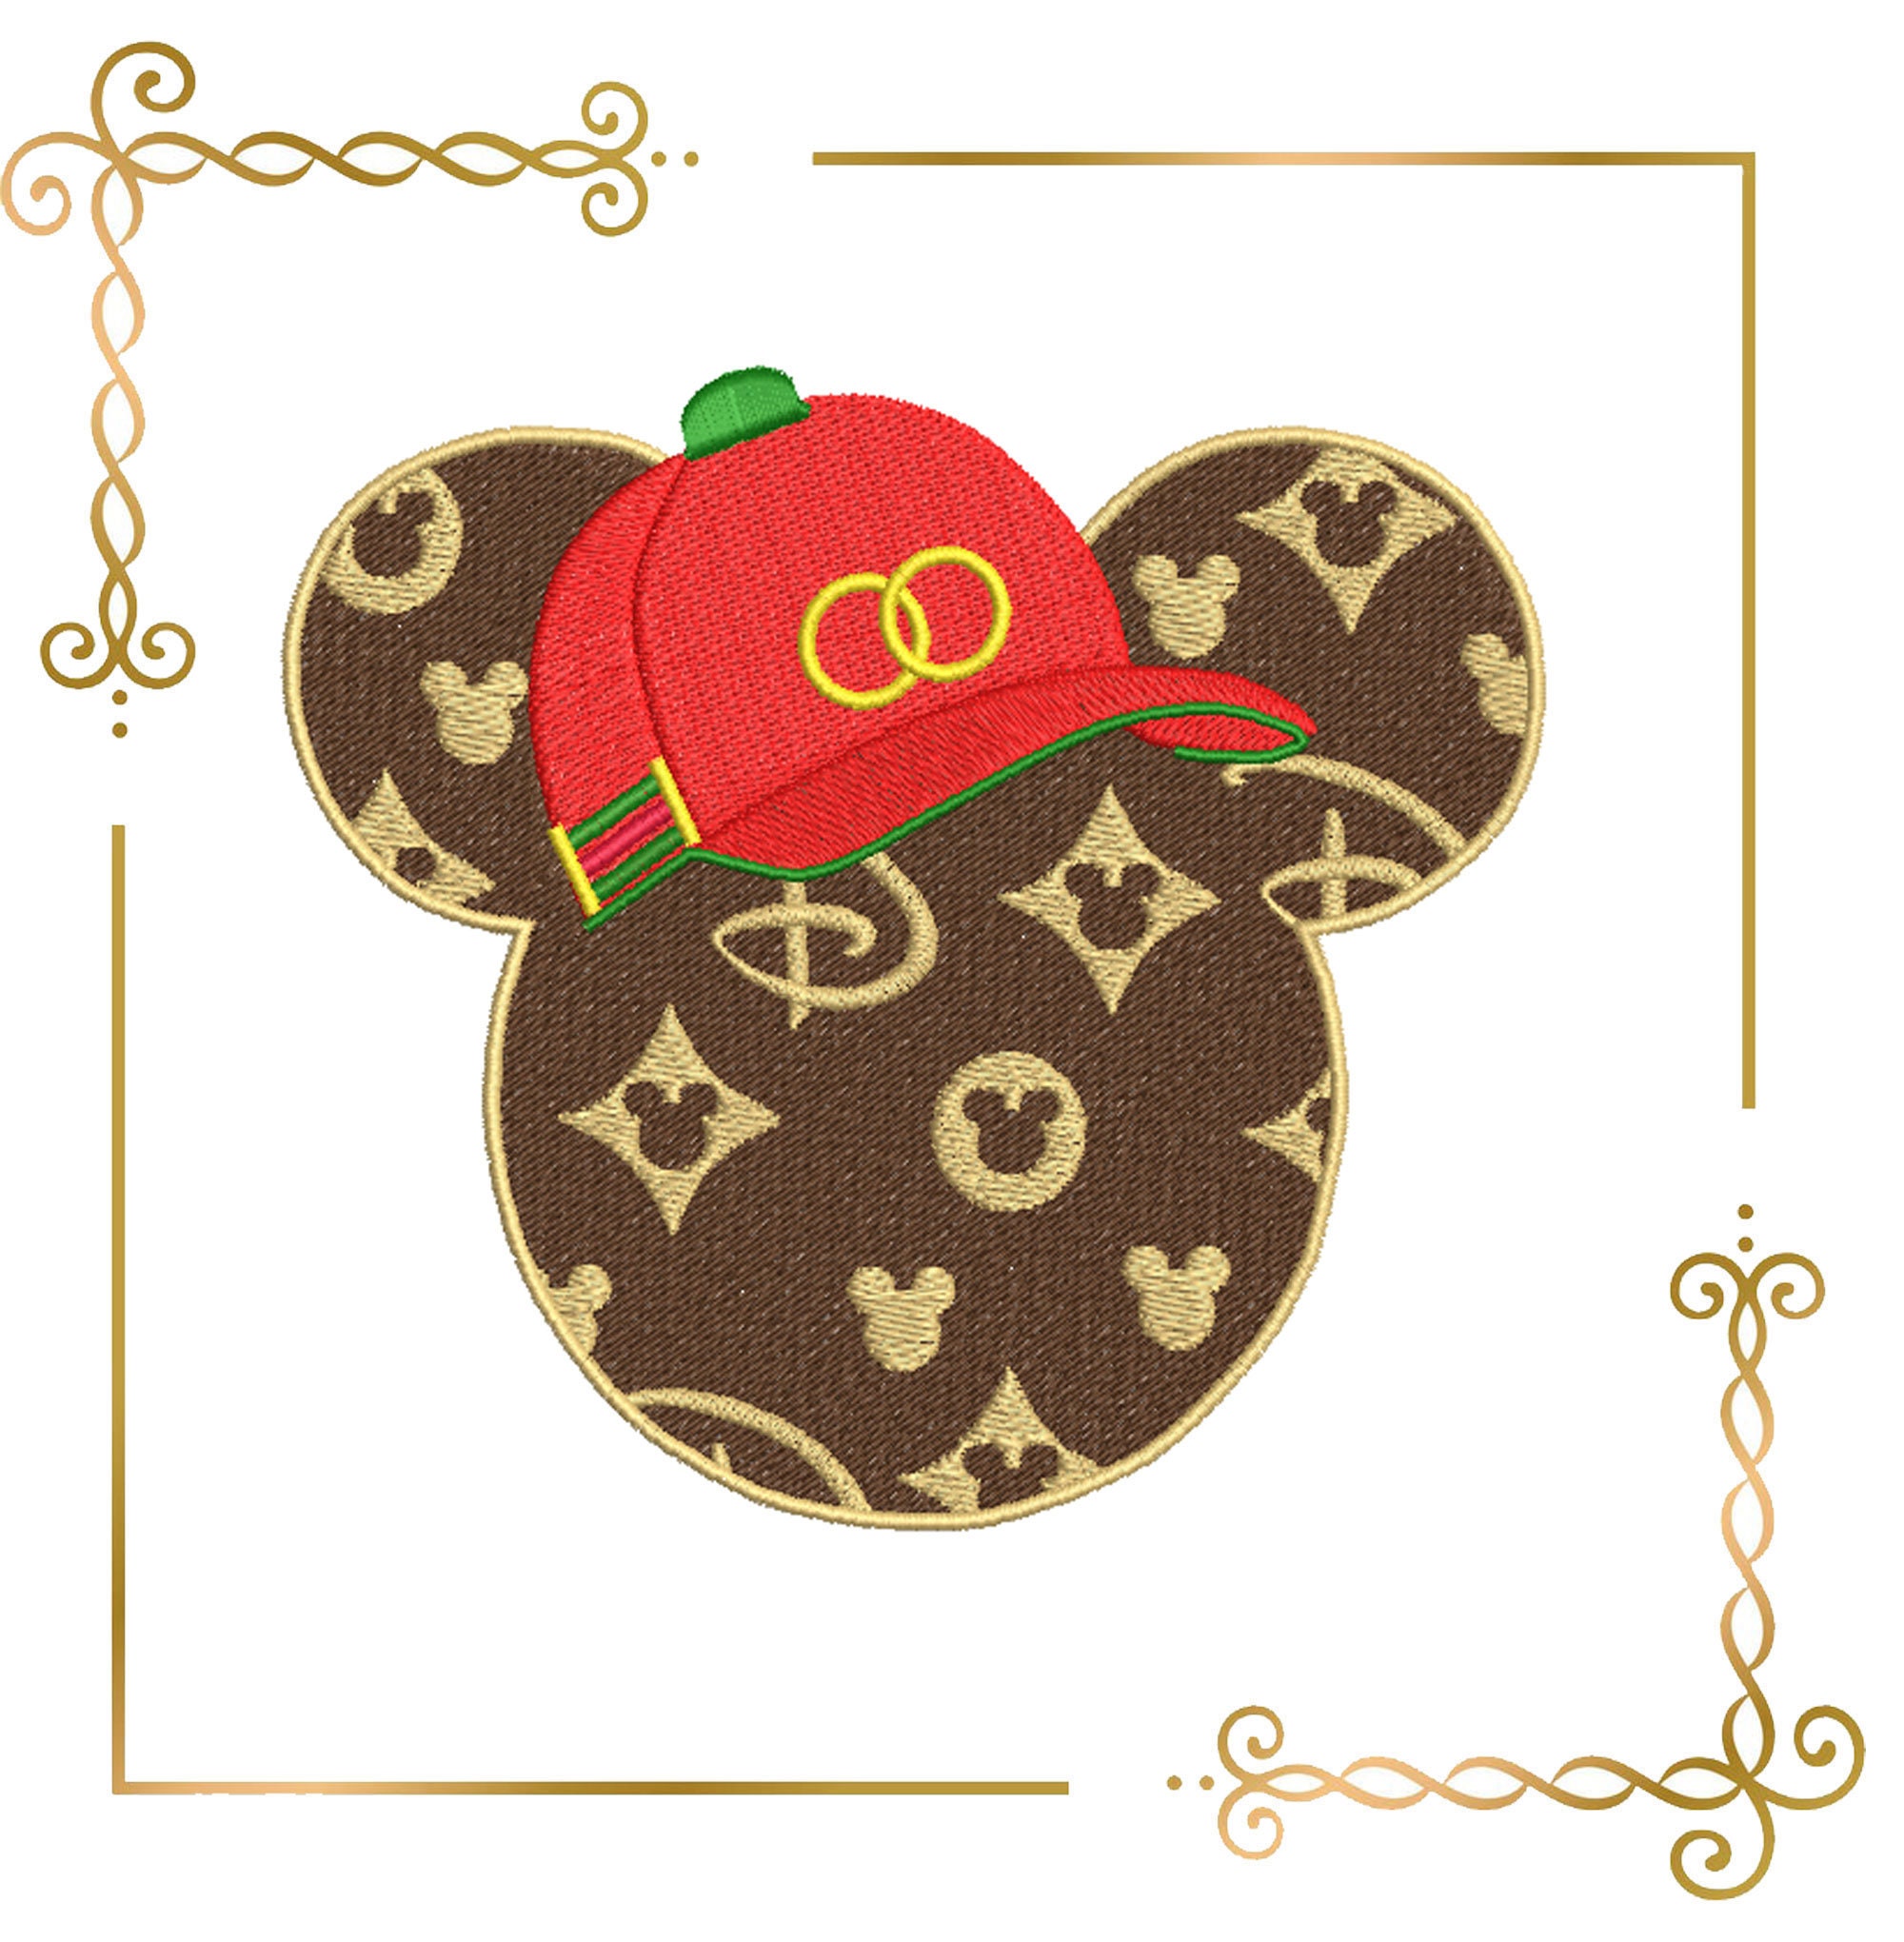 Accessories, Mickey And Minnie Mouse Louis Vuitton Hair Bonnet